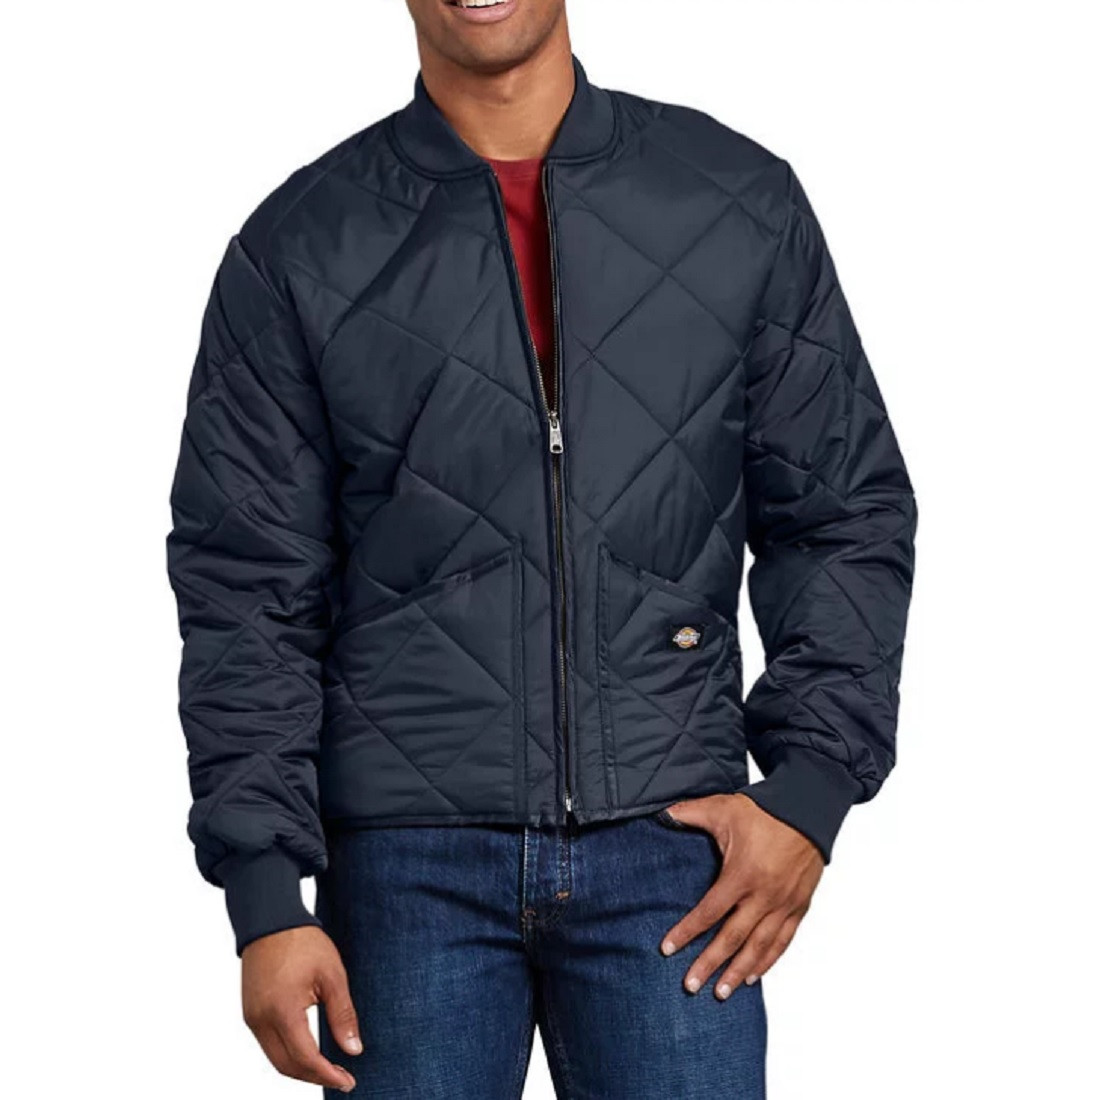 Big & Tall Men's Navy Quilted Nylon Zip Jacket by Dickies